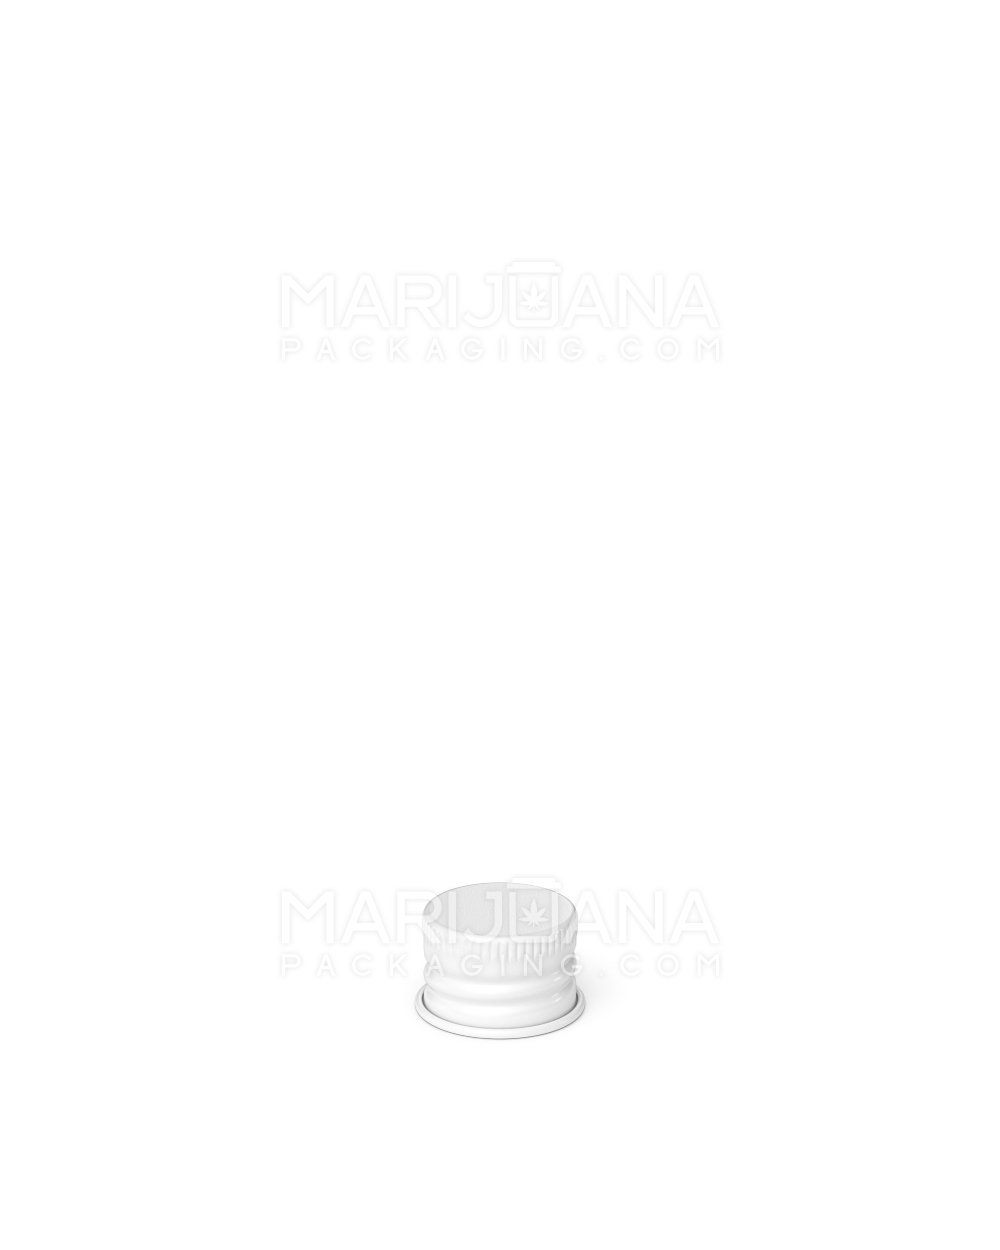 Ribbed Screw Top Metal Caps w/ Foam Liner | 18mm - Glossy White - 400 Count - 3